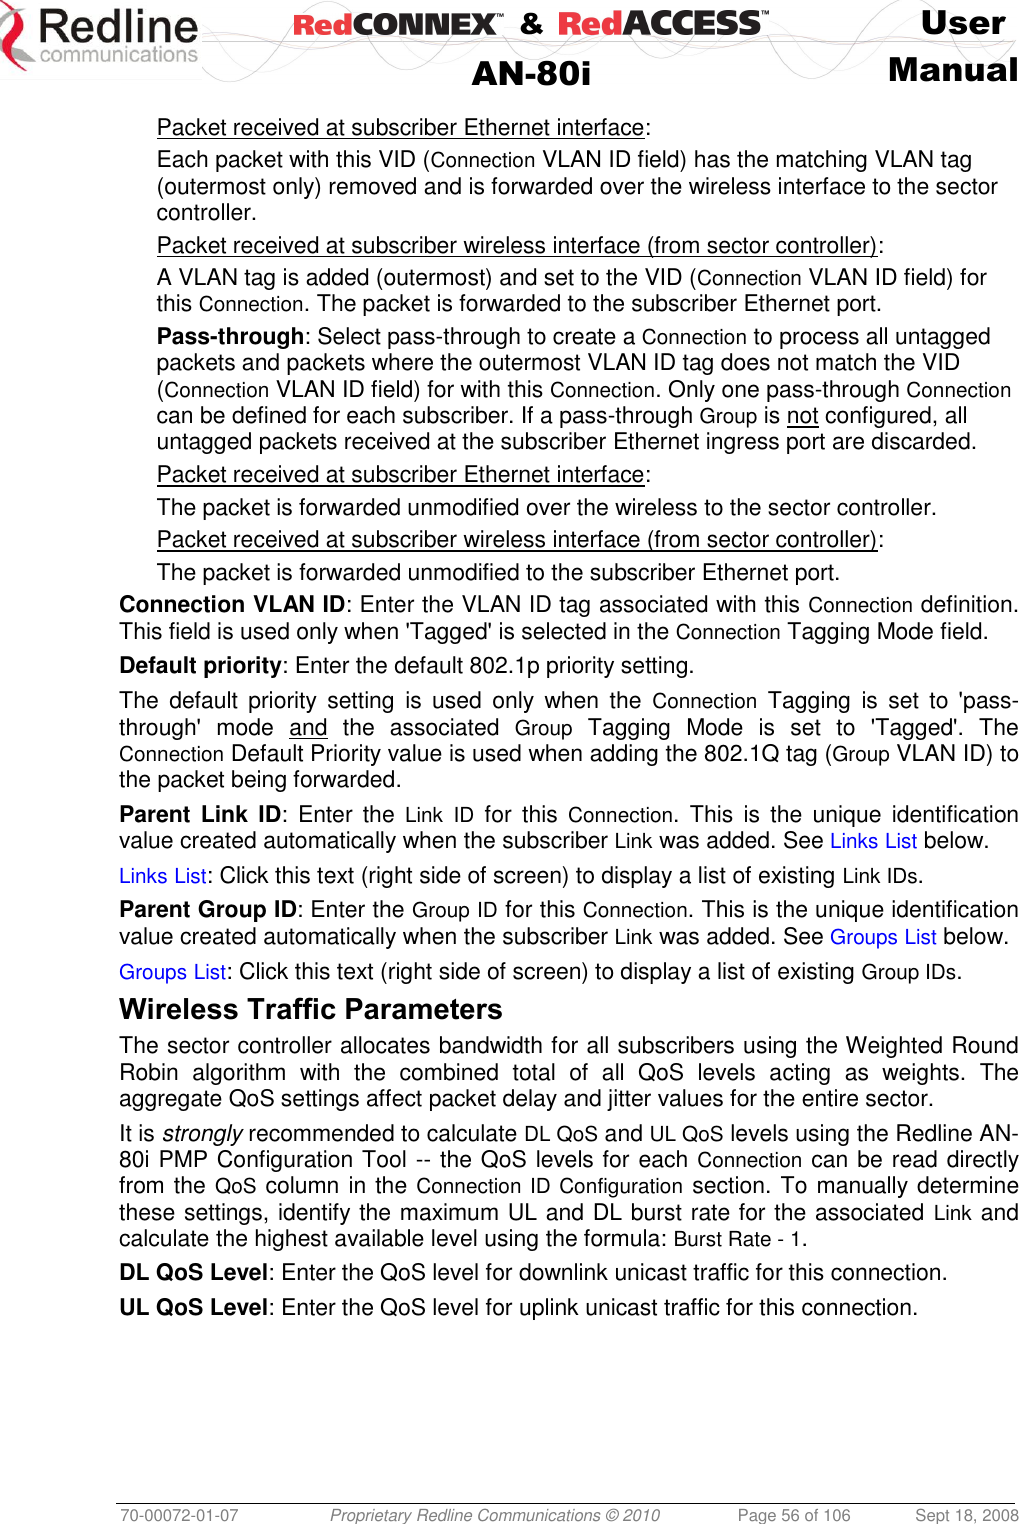    &amp;  User  AN-80i Manual  70-00072-01-07 Proprietary Redline Communications © 2010  Page 56 of 106  Sept 18, 2008  Packet received at subscriber Ethernet interface: Each packet with this VID (Connection VLAN ID field) has the matching VLAN tag (outermost only) removed and is forwarded over the wireless interface to the sector controller.  Packet received at subscriber wireless interface (from sector controller): A VLAN tag is added (outermost) and set to the VID (Connection VLAN ID field) for this Connection. The packet is forwarded to the subscriber Ethernet port.  Pass-through: Select pass-through to create a Connection to process all untagged packets and packets where the outermost VLAN ID tag does not match the VID (Connection VLAN ID field) for with this Connection. Only one pass-through Connection can be defined for each subscriber. If a pass-through Group is not configured, all untagged packets received at the subscriber Ethernet ingress port are discarded. Packet received at subscriber Ethernet interface: The packet is forwarded unmodified over the wireless to the sector controller. Packet received at subscriber wireless interface (from sector controller): The packet is forwarded unmodified to the subscriber Ethernet port.  Connection VLAN ID: Enter the VLAN ID tag associated with this Connection definition. This field is used only when &apos;Tagged&apos; is selected in the Connection Tagging Mode field.  Default priority: Enter the default 802.1p priority setting. The  default  priority  setting  is  used  only  when  the  Connection  Tagging  is  set  to  &apos;pass-through&apos;  mode  and  the  associated  Group  Tagging  Mode  is  set  to  &apos;Tagged&apos;.  The Connection Default Priority value is used when adding the 802.1Q tag (Group VLAN ID) to the packet being forwarded. Parent  Link  ID:  Enter  the  Link ID  for  this  Connection.  This  is  the  unique  identification value created automatically when the subscriber Link was added. See Links List below. Links List: Click this text (right side of screen) to display a list of existing Link IDs. Parent Group ID: Enter the Group ID for this Connection. This is the unique identification value created automatically when the subscriber Link was added. See Groups List below. Groups List: Click this text (right side of screen) to display a list of existing Group IDs. Wireless Traffic Parameters The sector controller allocates bandwidth for all subscribers using the Weighted Round Robin  algorithm  with  the  combined  total  of  all  QoS  levels  acting  as  weights.  The aggregate QoS settings affect packet delay and jitter values for the entire sector.  It is strongly recommended to calculate DL QoS and UL QoS levels using the Redline AN-80i PMP Configuration Tool -- the QoS levels for each Connection can be read directly from the QoS column in the Connection ID Configuration section. To manually determine these settings, identify the maximum UL and DL burst rate for the associated Link and calculate the highest available level using the formula: Burst Rate - 1. DL QoS Level: Enter the QoS level for downlink unicast traffic for this connection.  UL QoS Level: Enter the QoS level for uplink unicast traffic for this connection. 